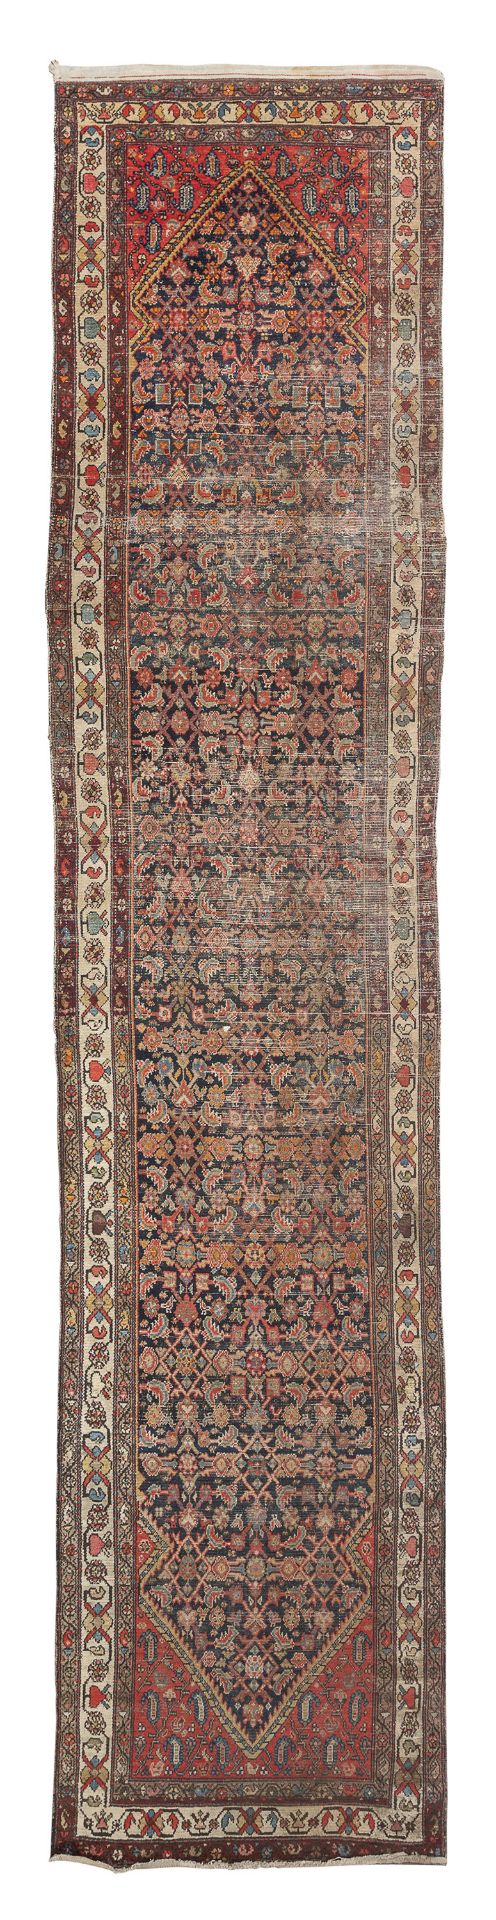 MALAYER RUNNER EARLY 20TH CENTURY